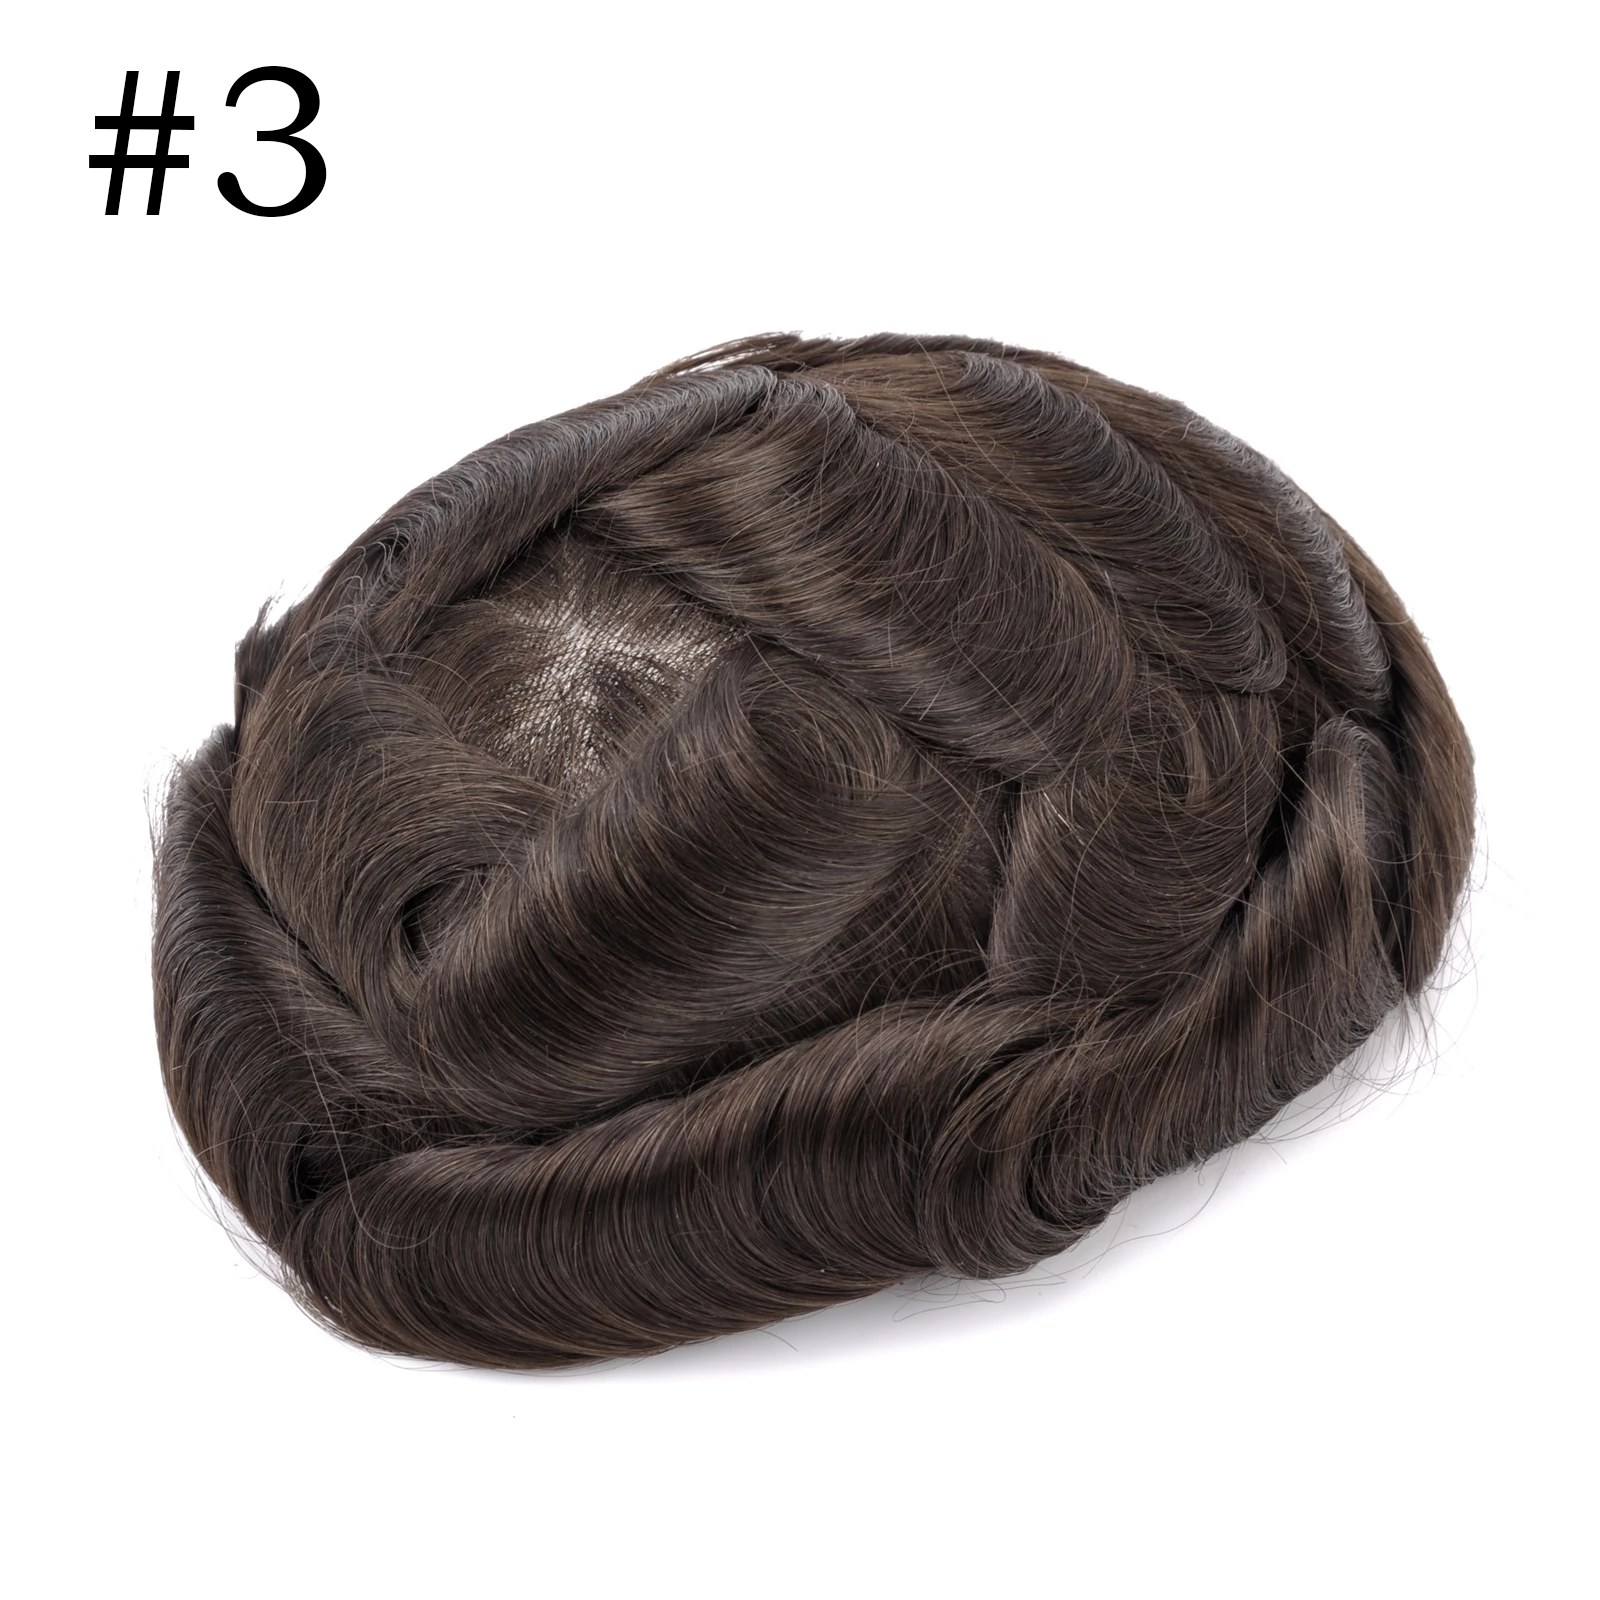 GEXWIGS Thin Skin Toupee Human Hair Replacement for Men V-Loop.